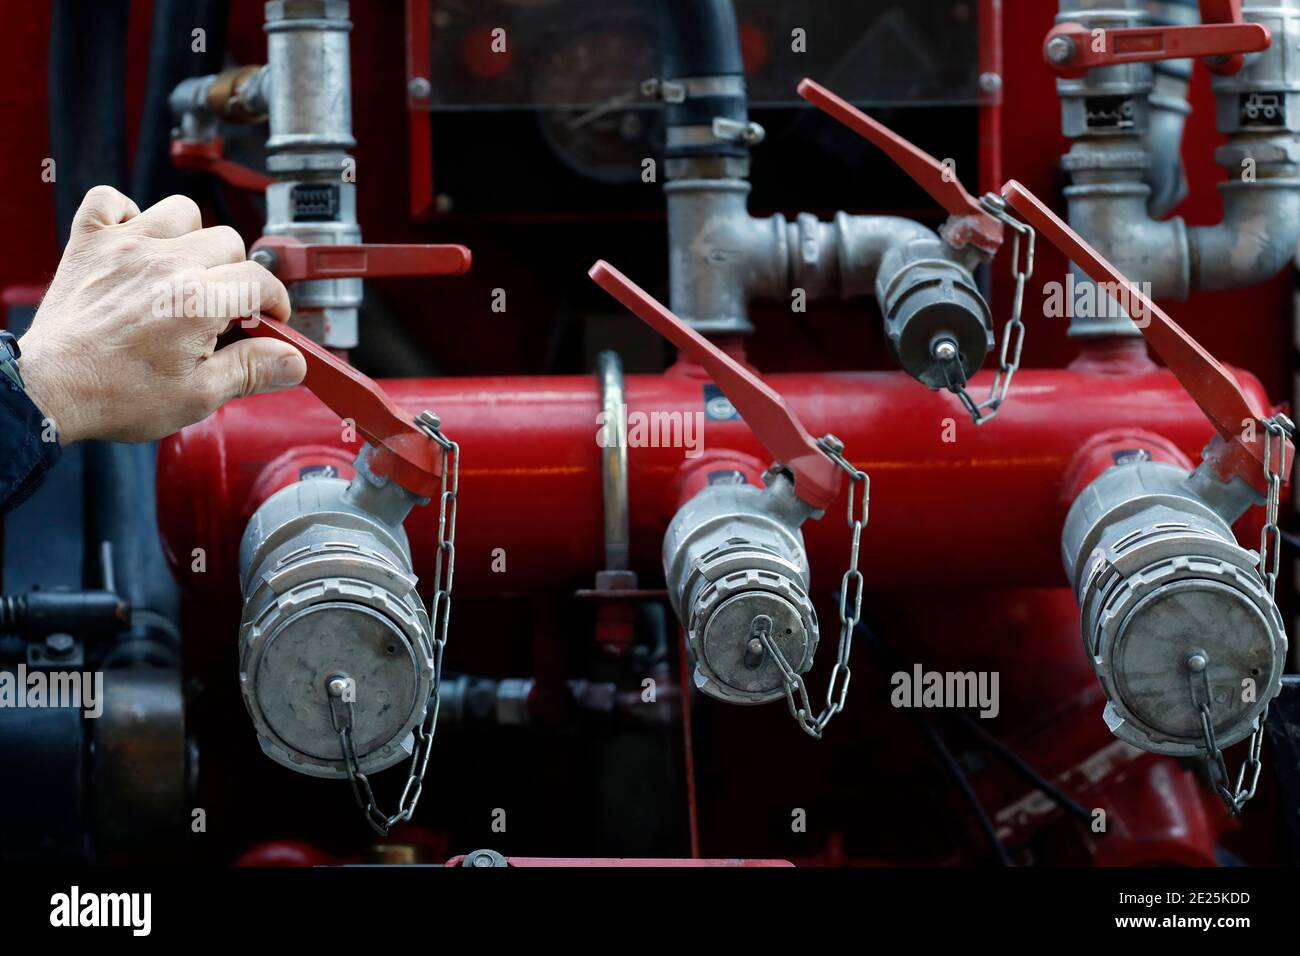 Fire department. Emergency vehicule. Sprinkler system. French Sapeurs Pompiers. France. Stock Photo